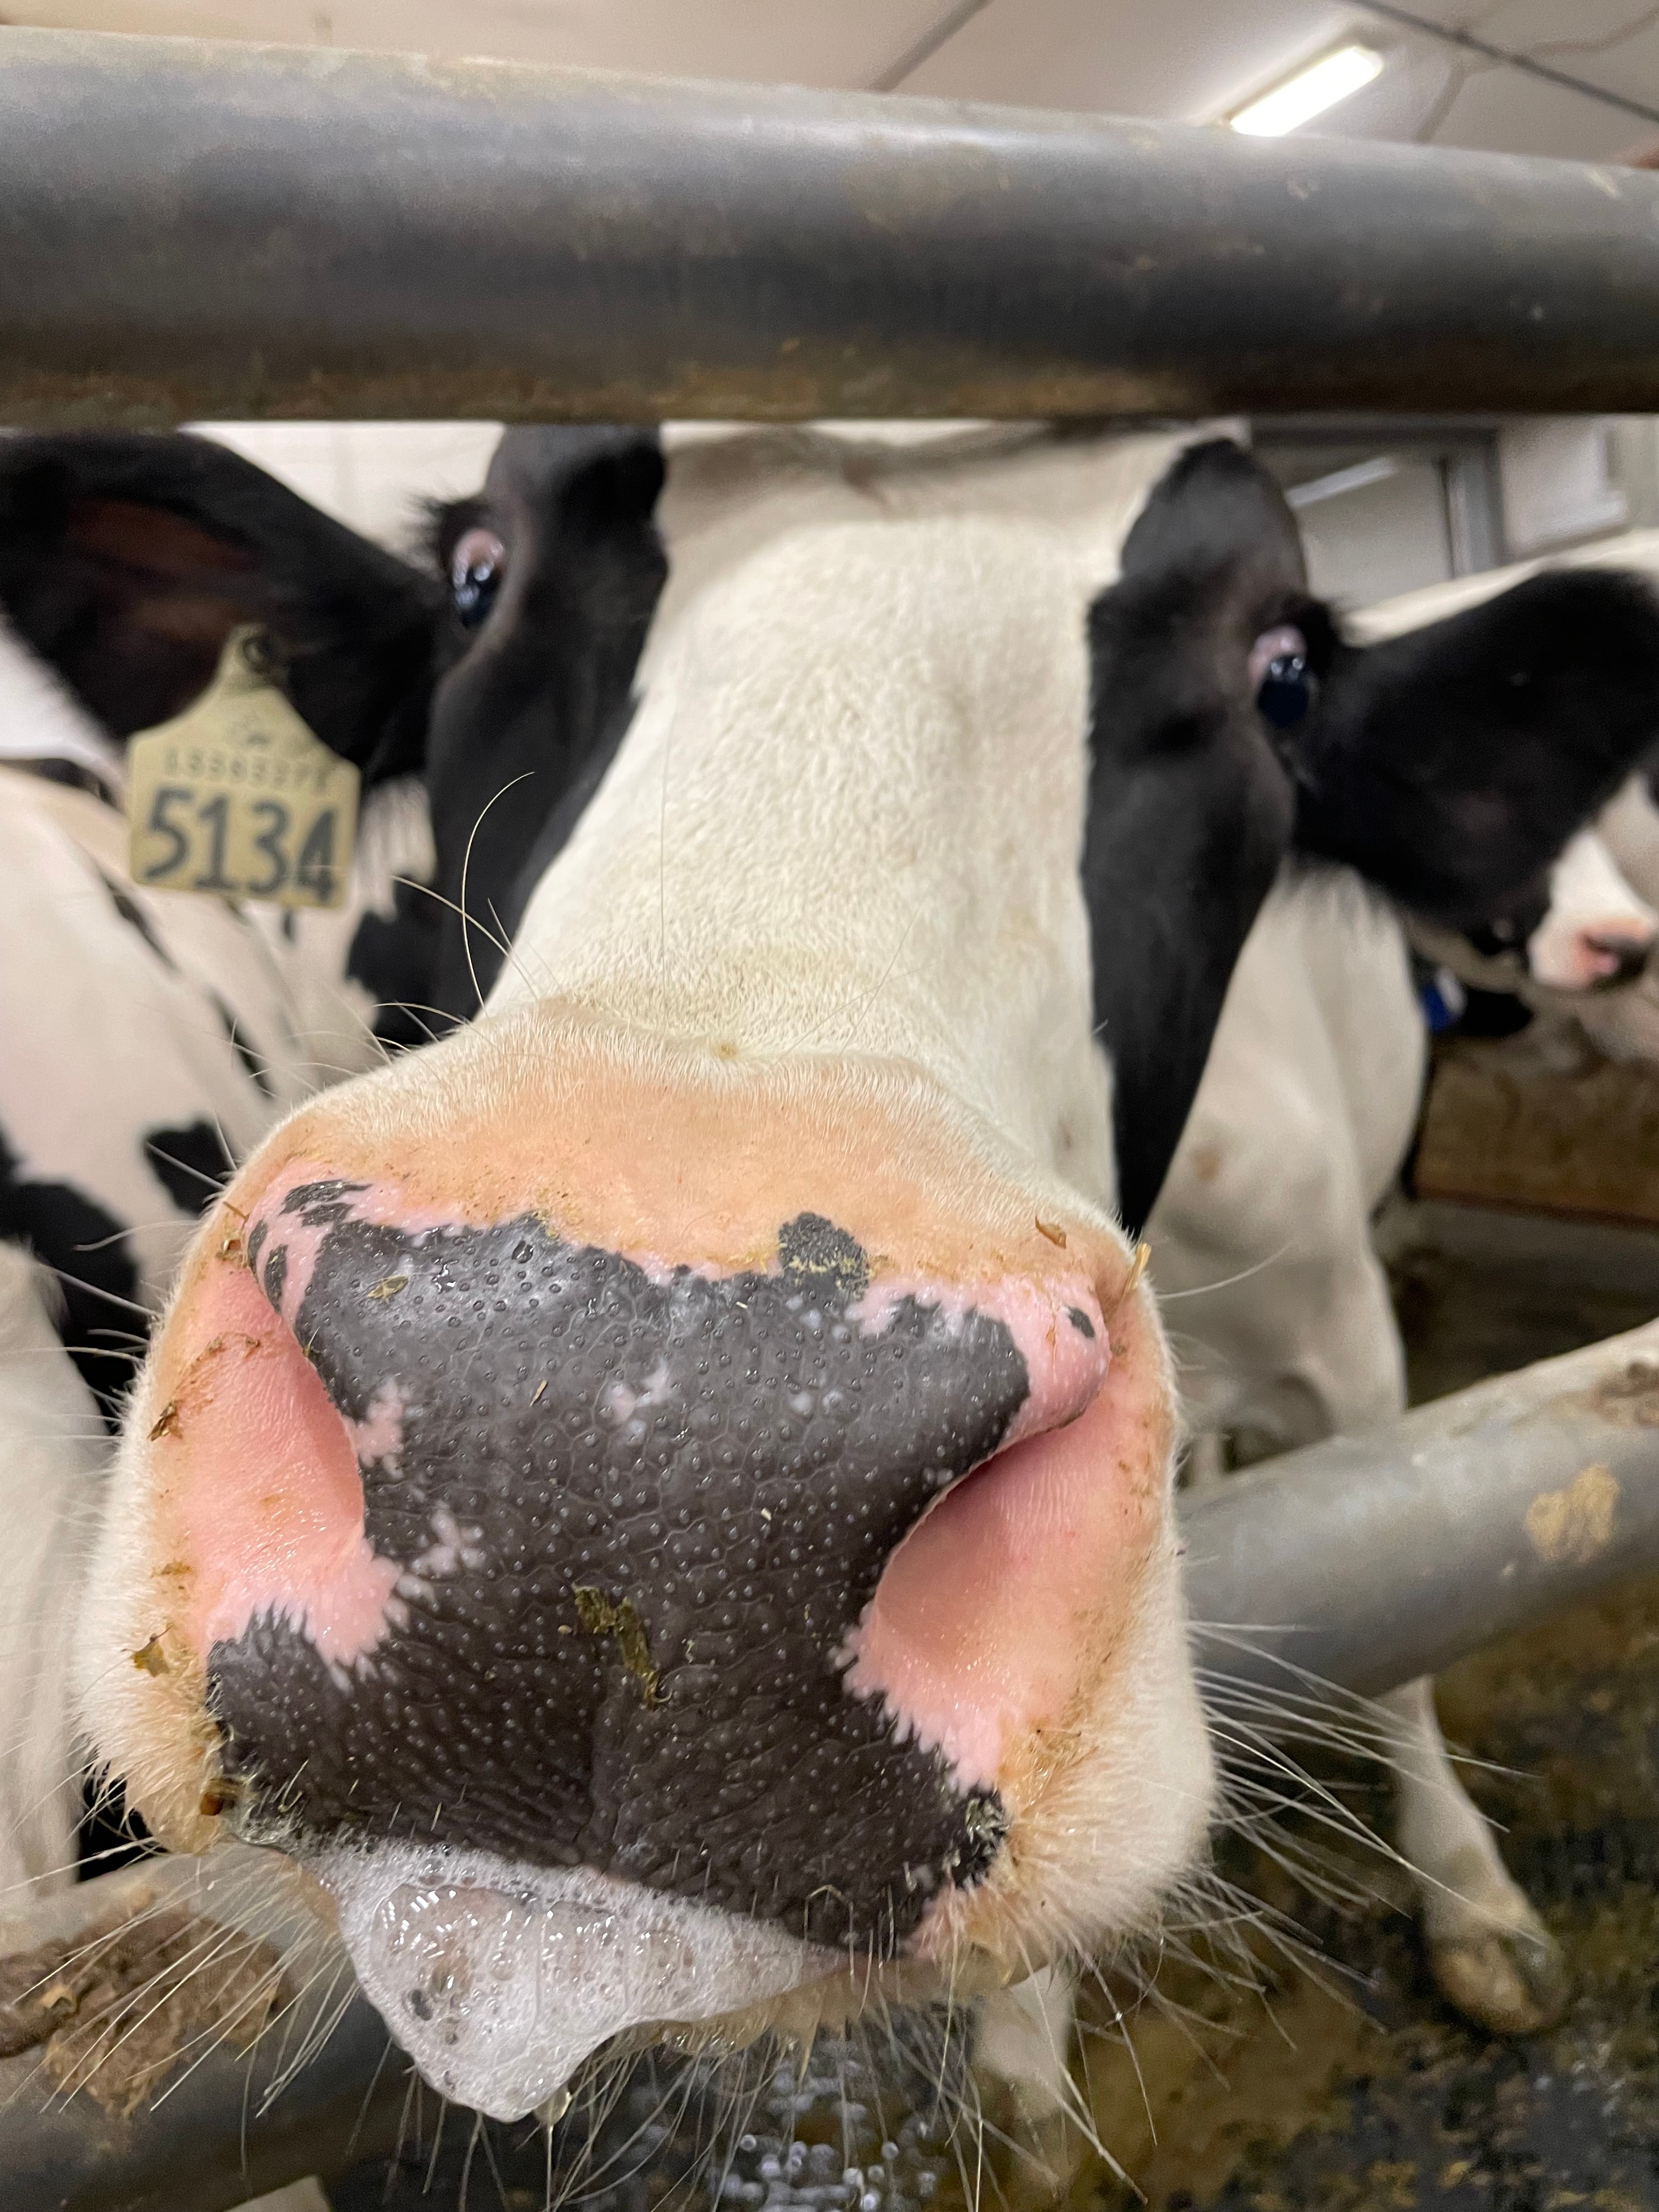 The front of a cow's black and white face as it drools with its nose sticking out.